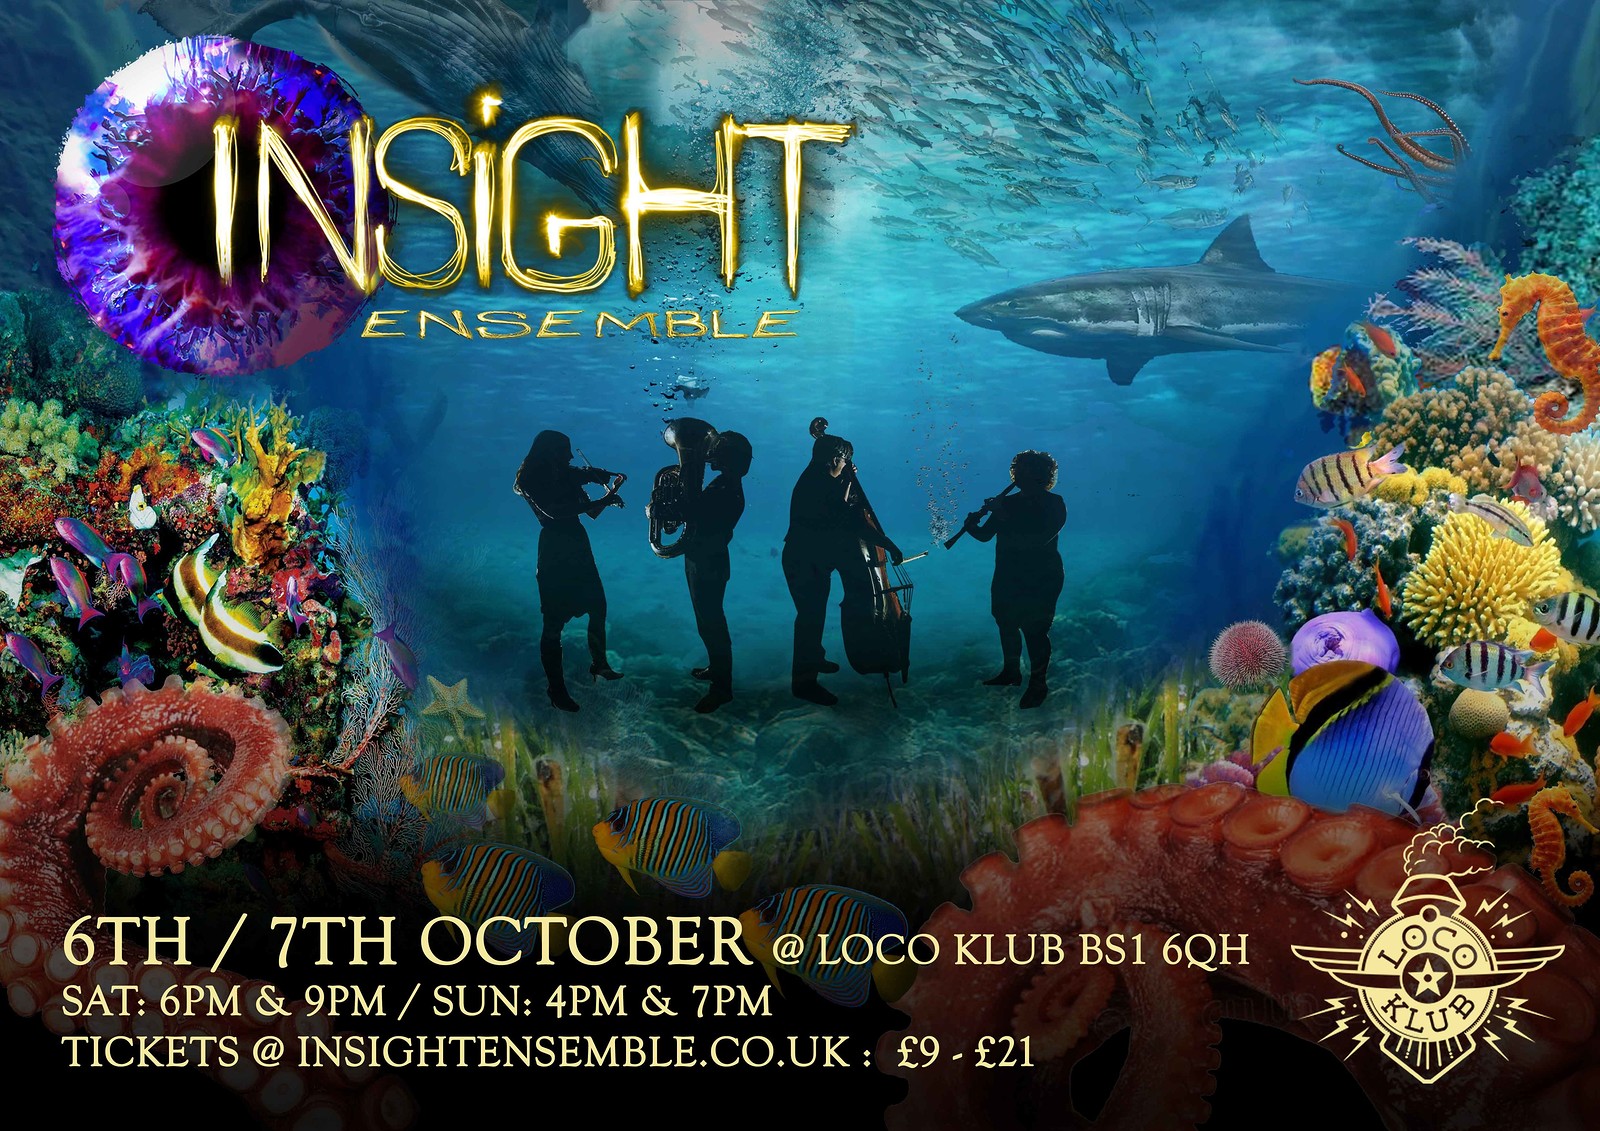 Insight Ensemble goes Under the Sea at The Loco Klub